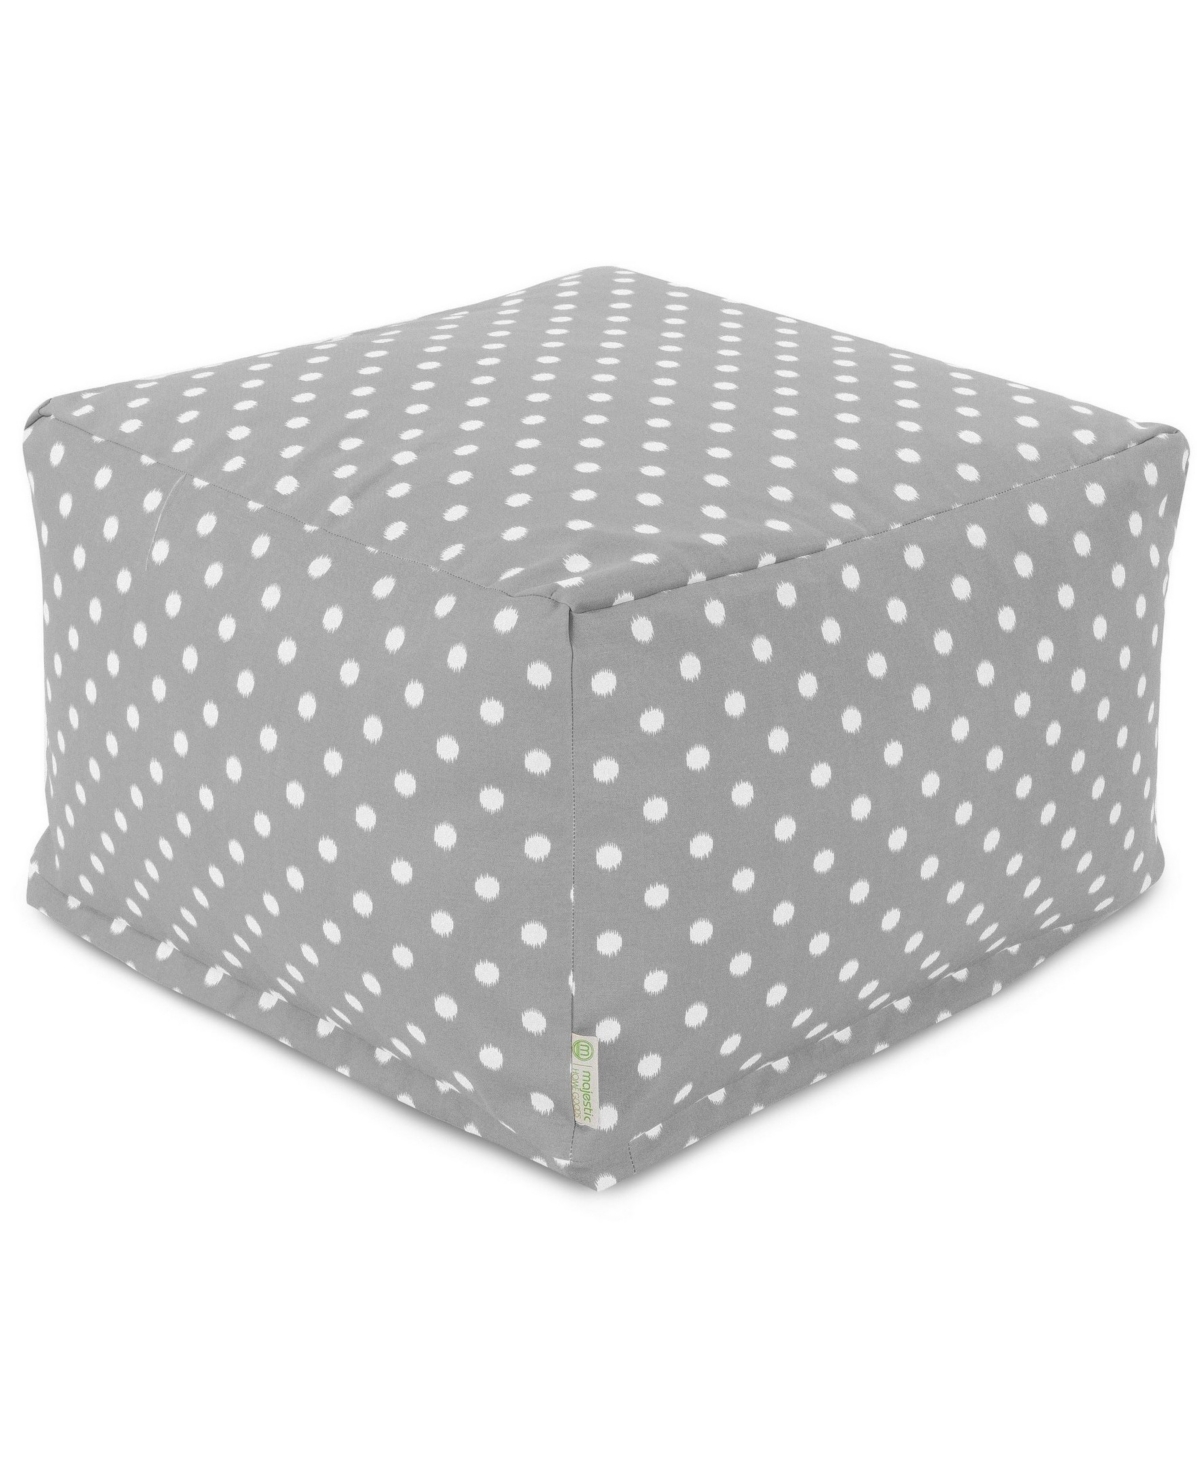 UPC 859072202719 product image for Majestic Home Goods Ikat Dot Ottoman Square Pouf 27